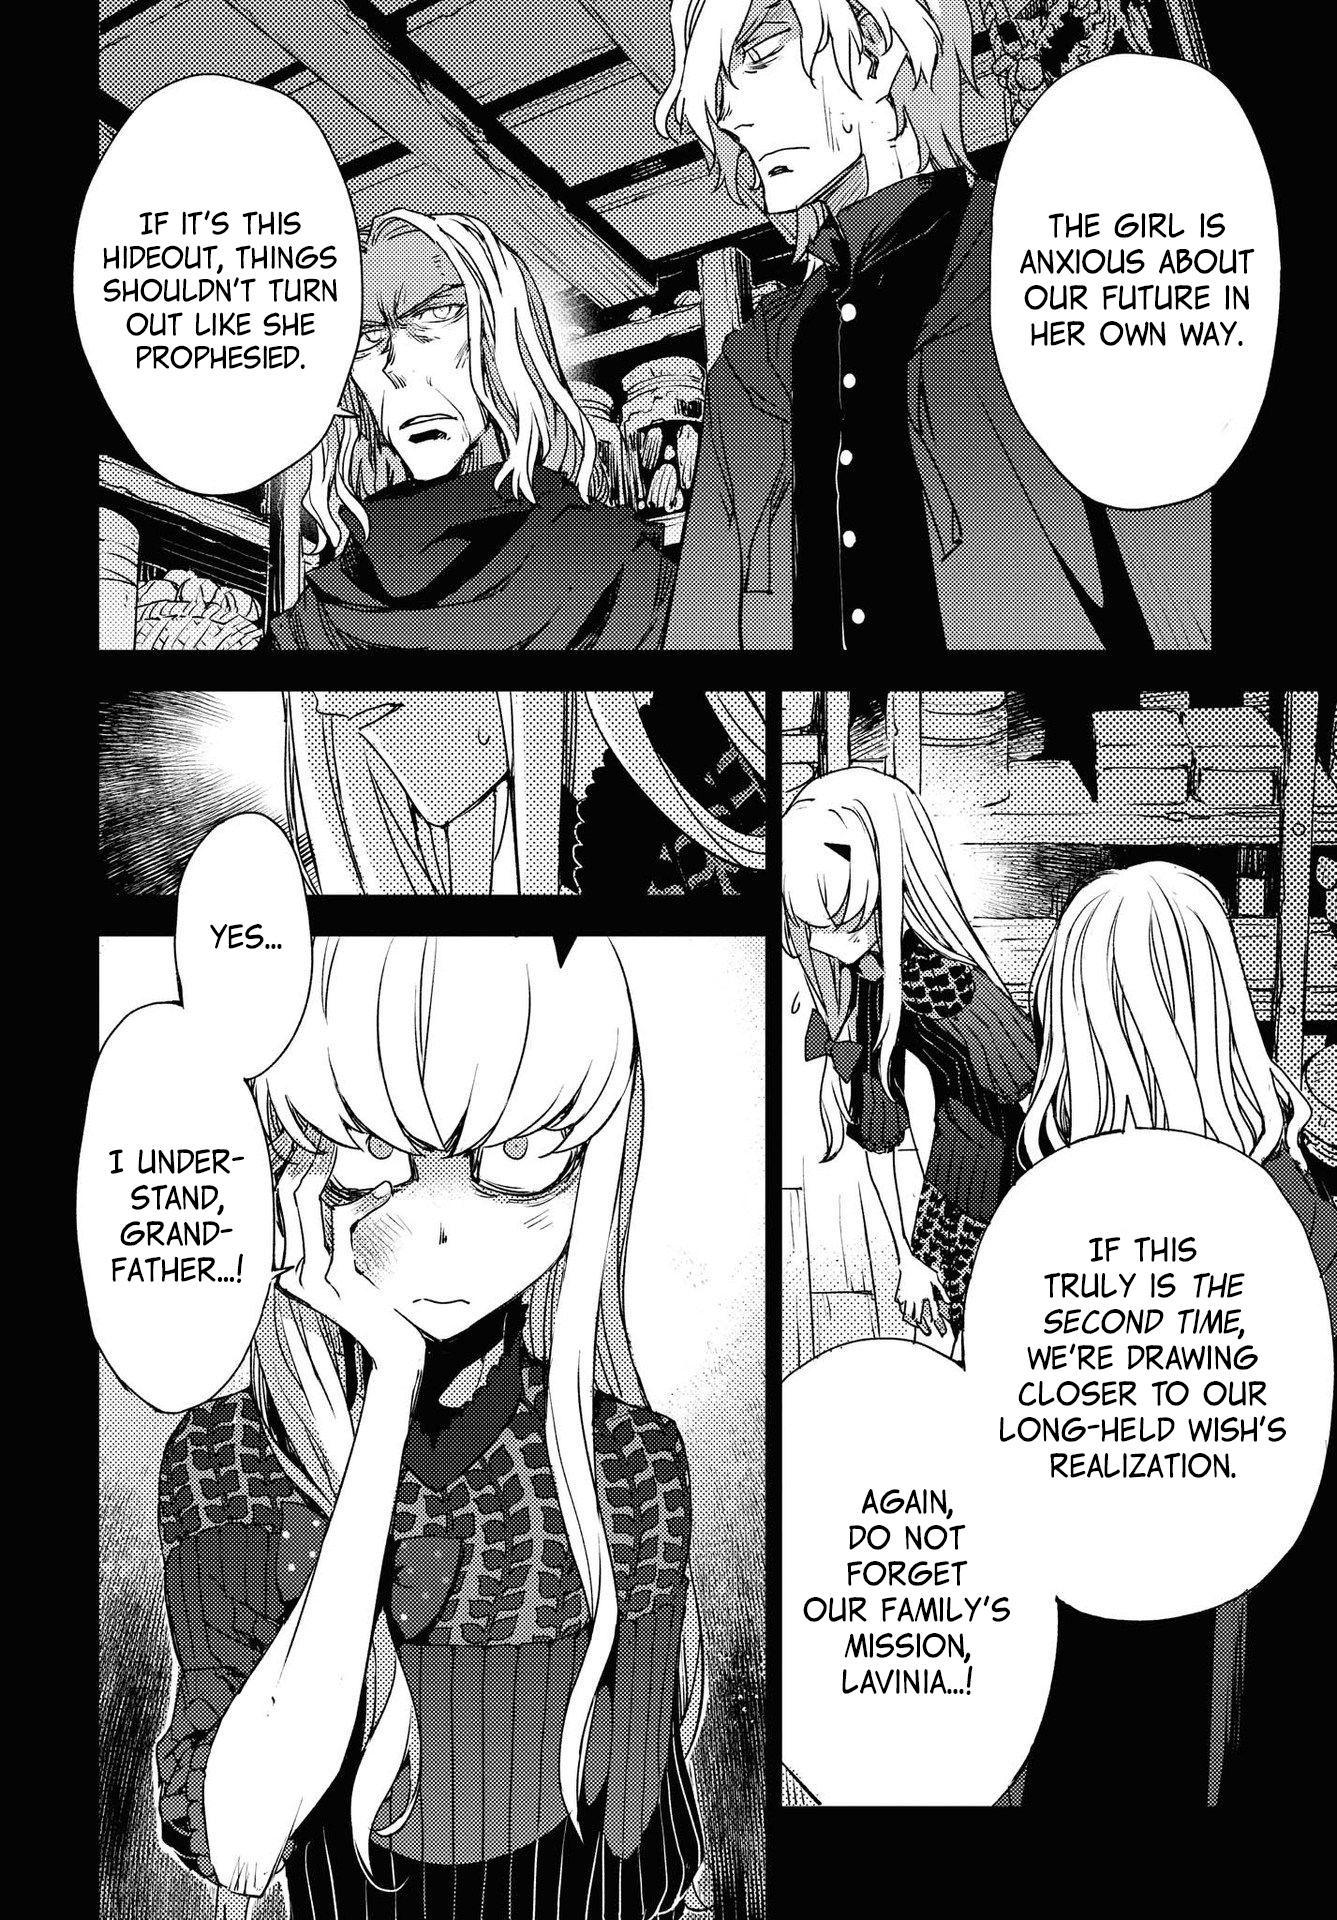 Fate/grand Order: Epic Of Remnant: Pseudo-Singularity Iv: The Forbidden Advent Garden, Salem - Heretical Salem Chapter 21: The Second Knot - 2 - Picture 2